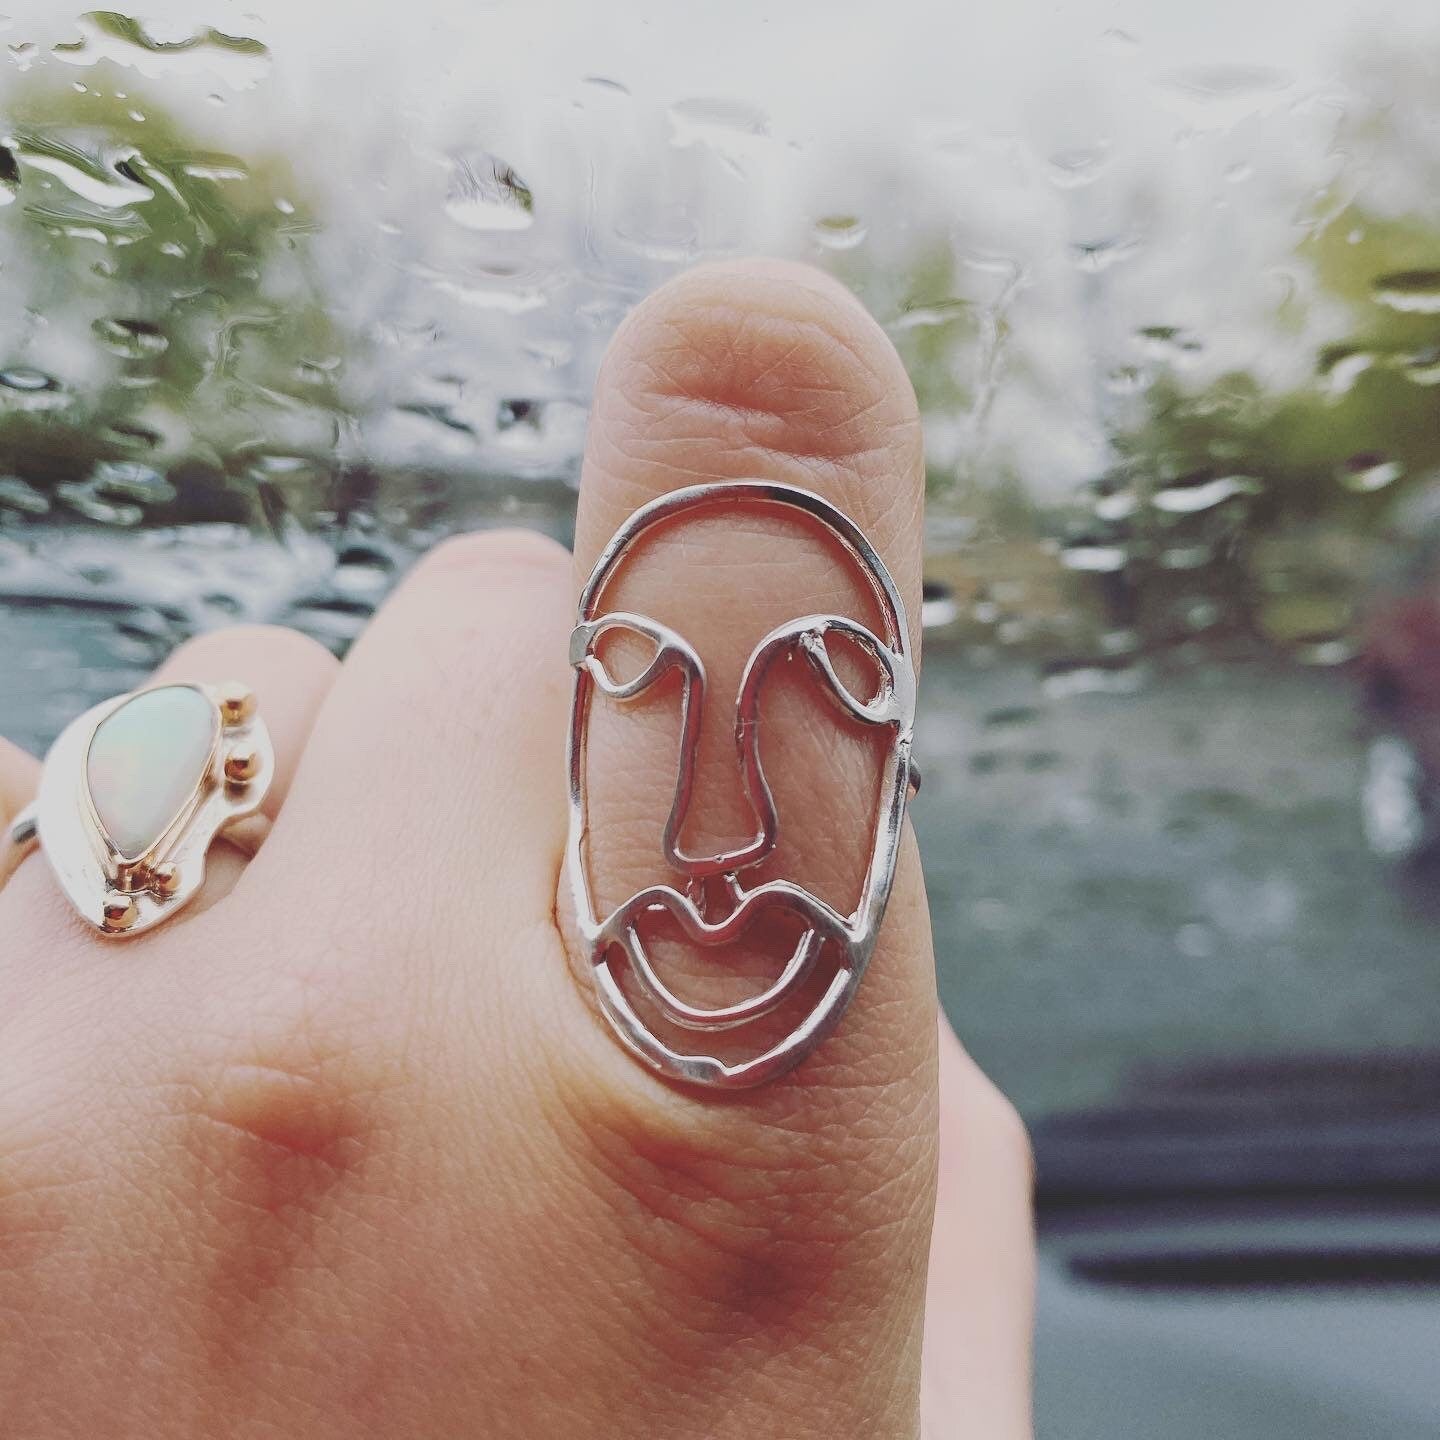 The Mask She Wears Ring in sterling silver • Made to order in your size